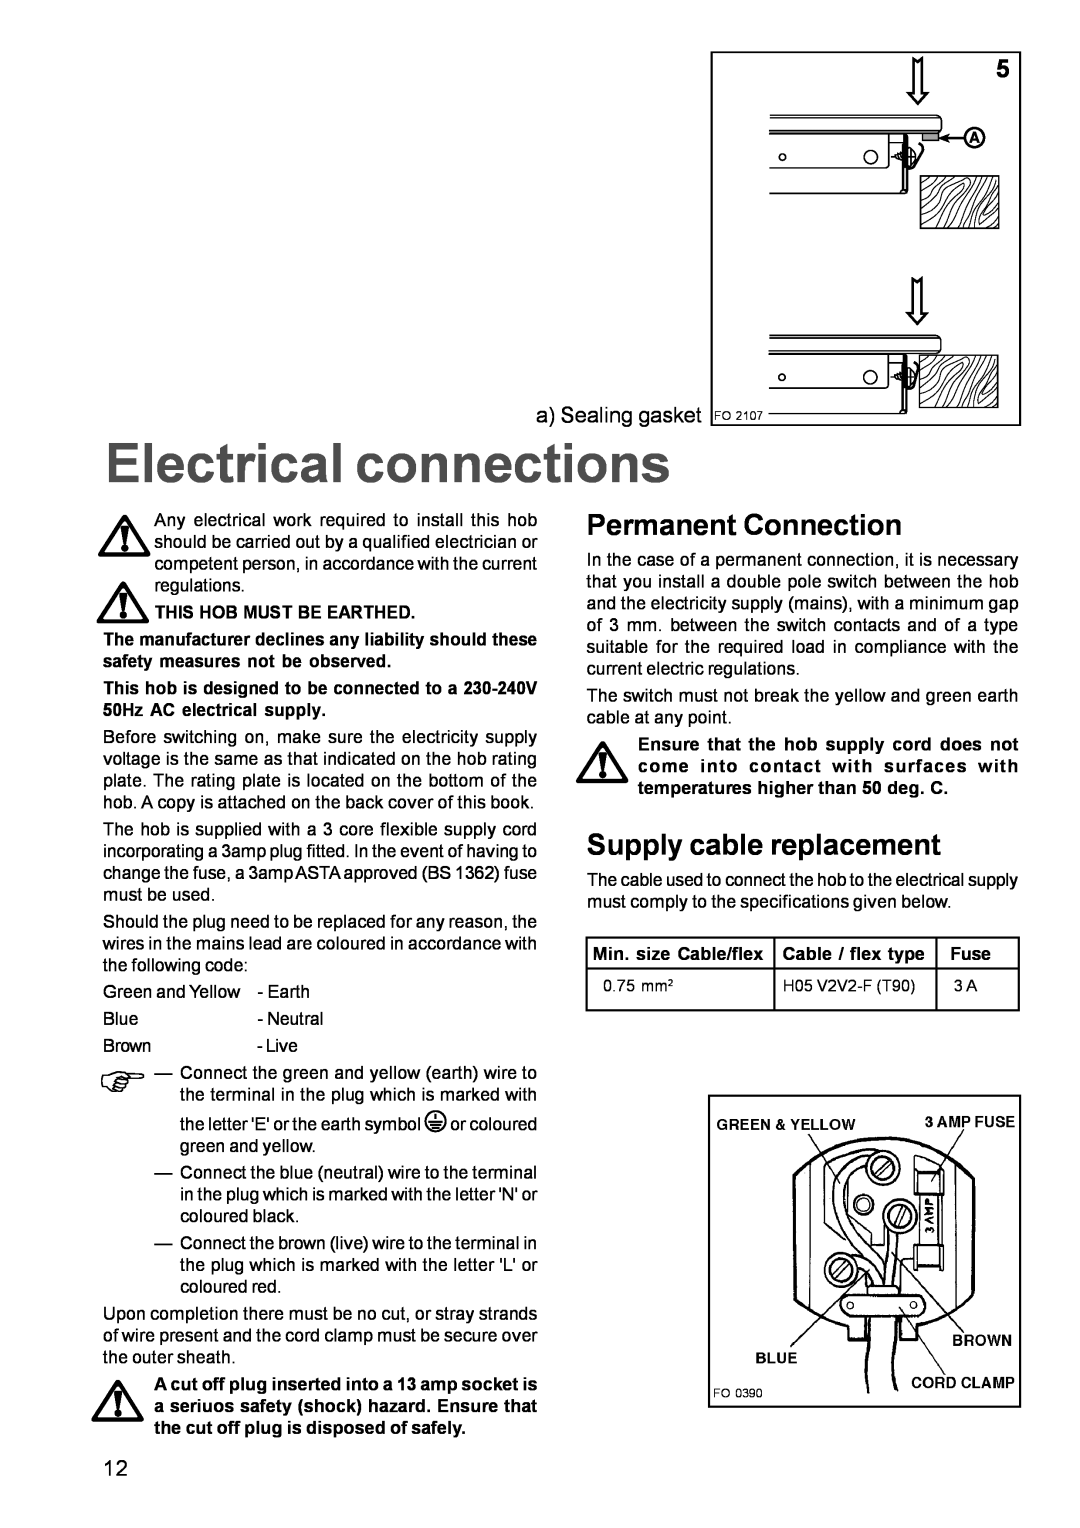 Zanussi ZGG642C manual Electrical connections, Permanent Connection, Supply cable replacement 